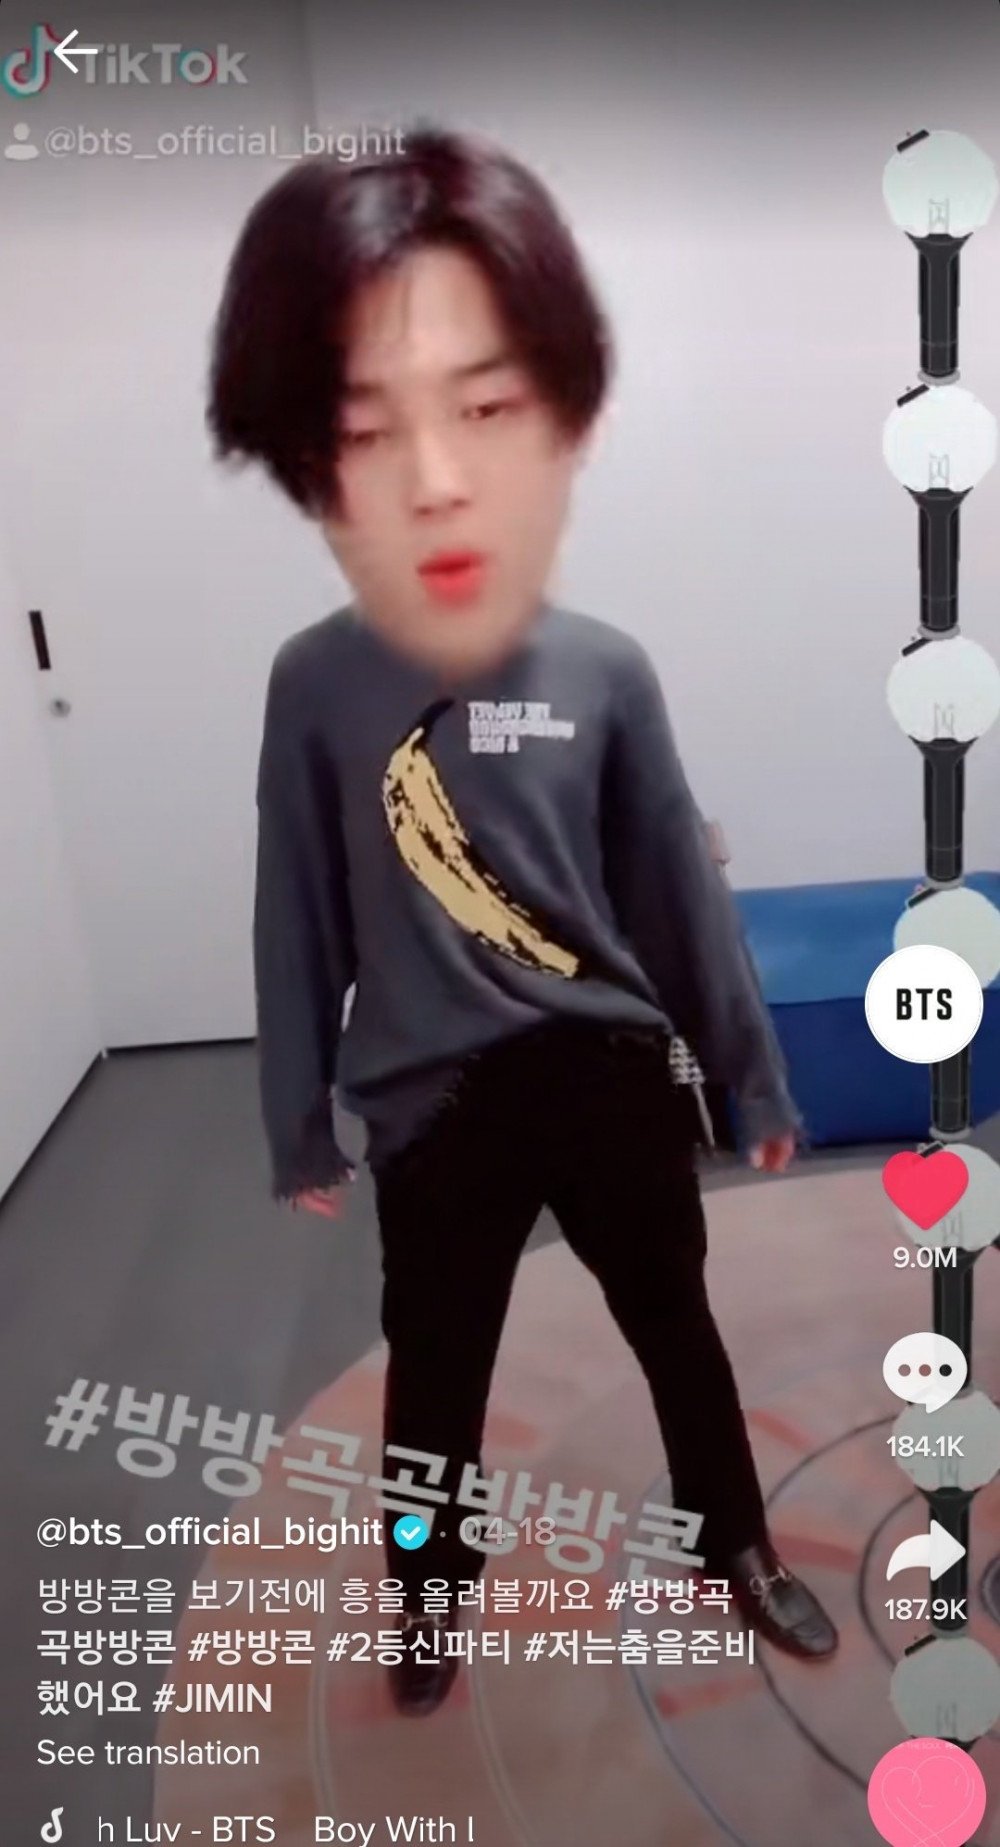 Bts Jimin Breaks Tiktok Record Anew With The Most Liked Video By A South Korean With 9 Million Likes Allkpop